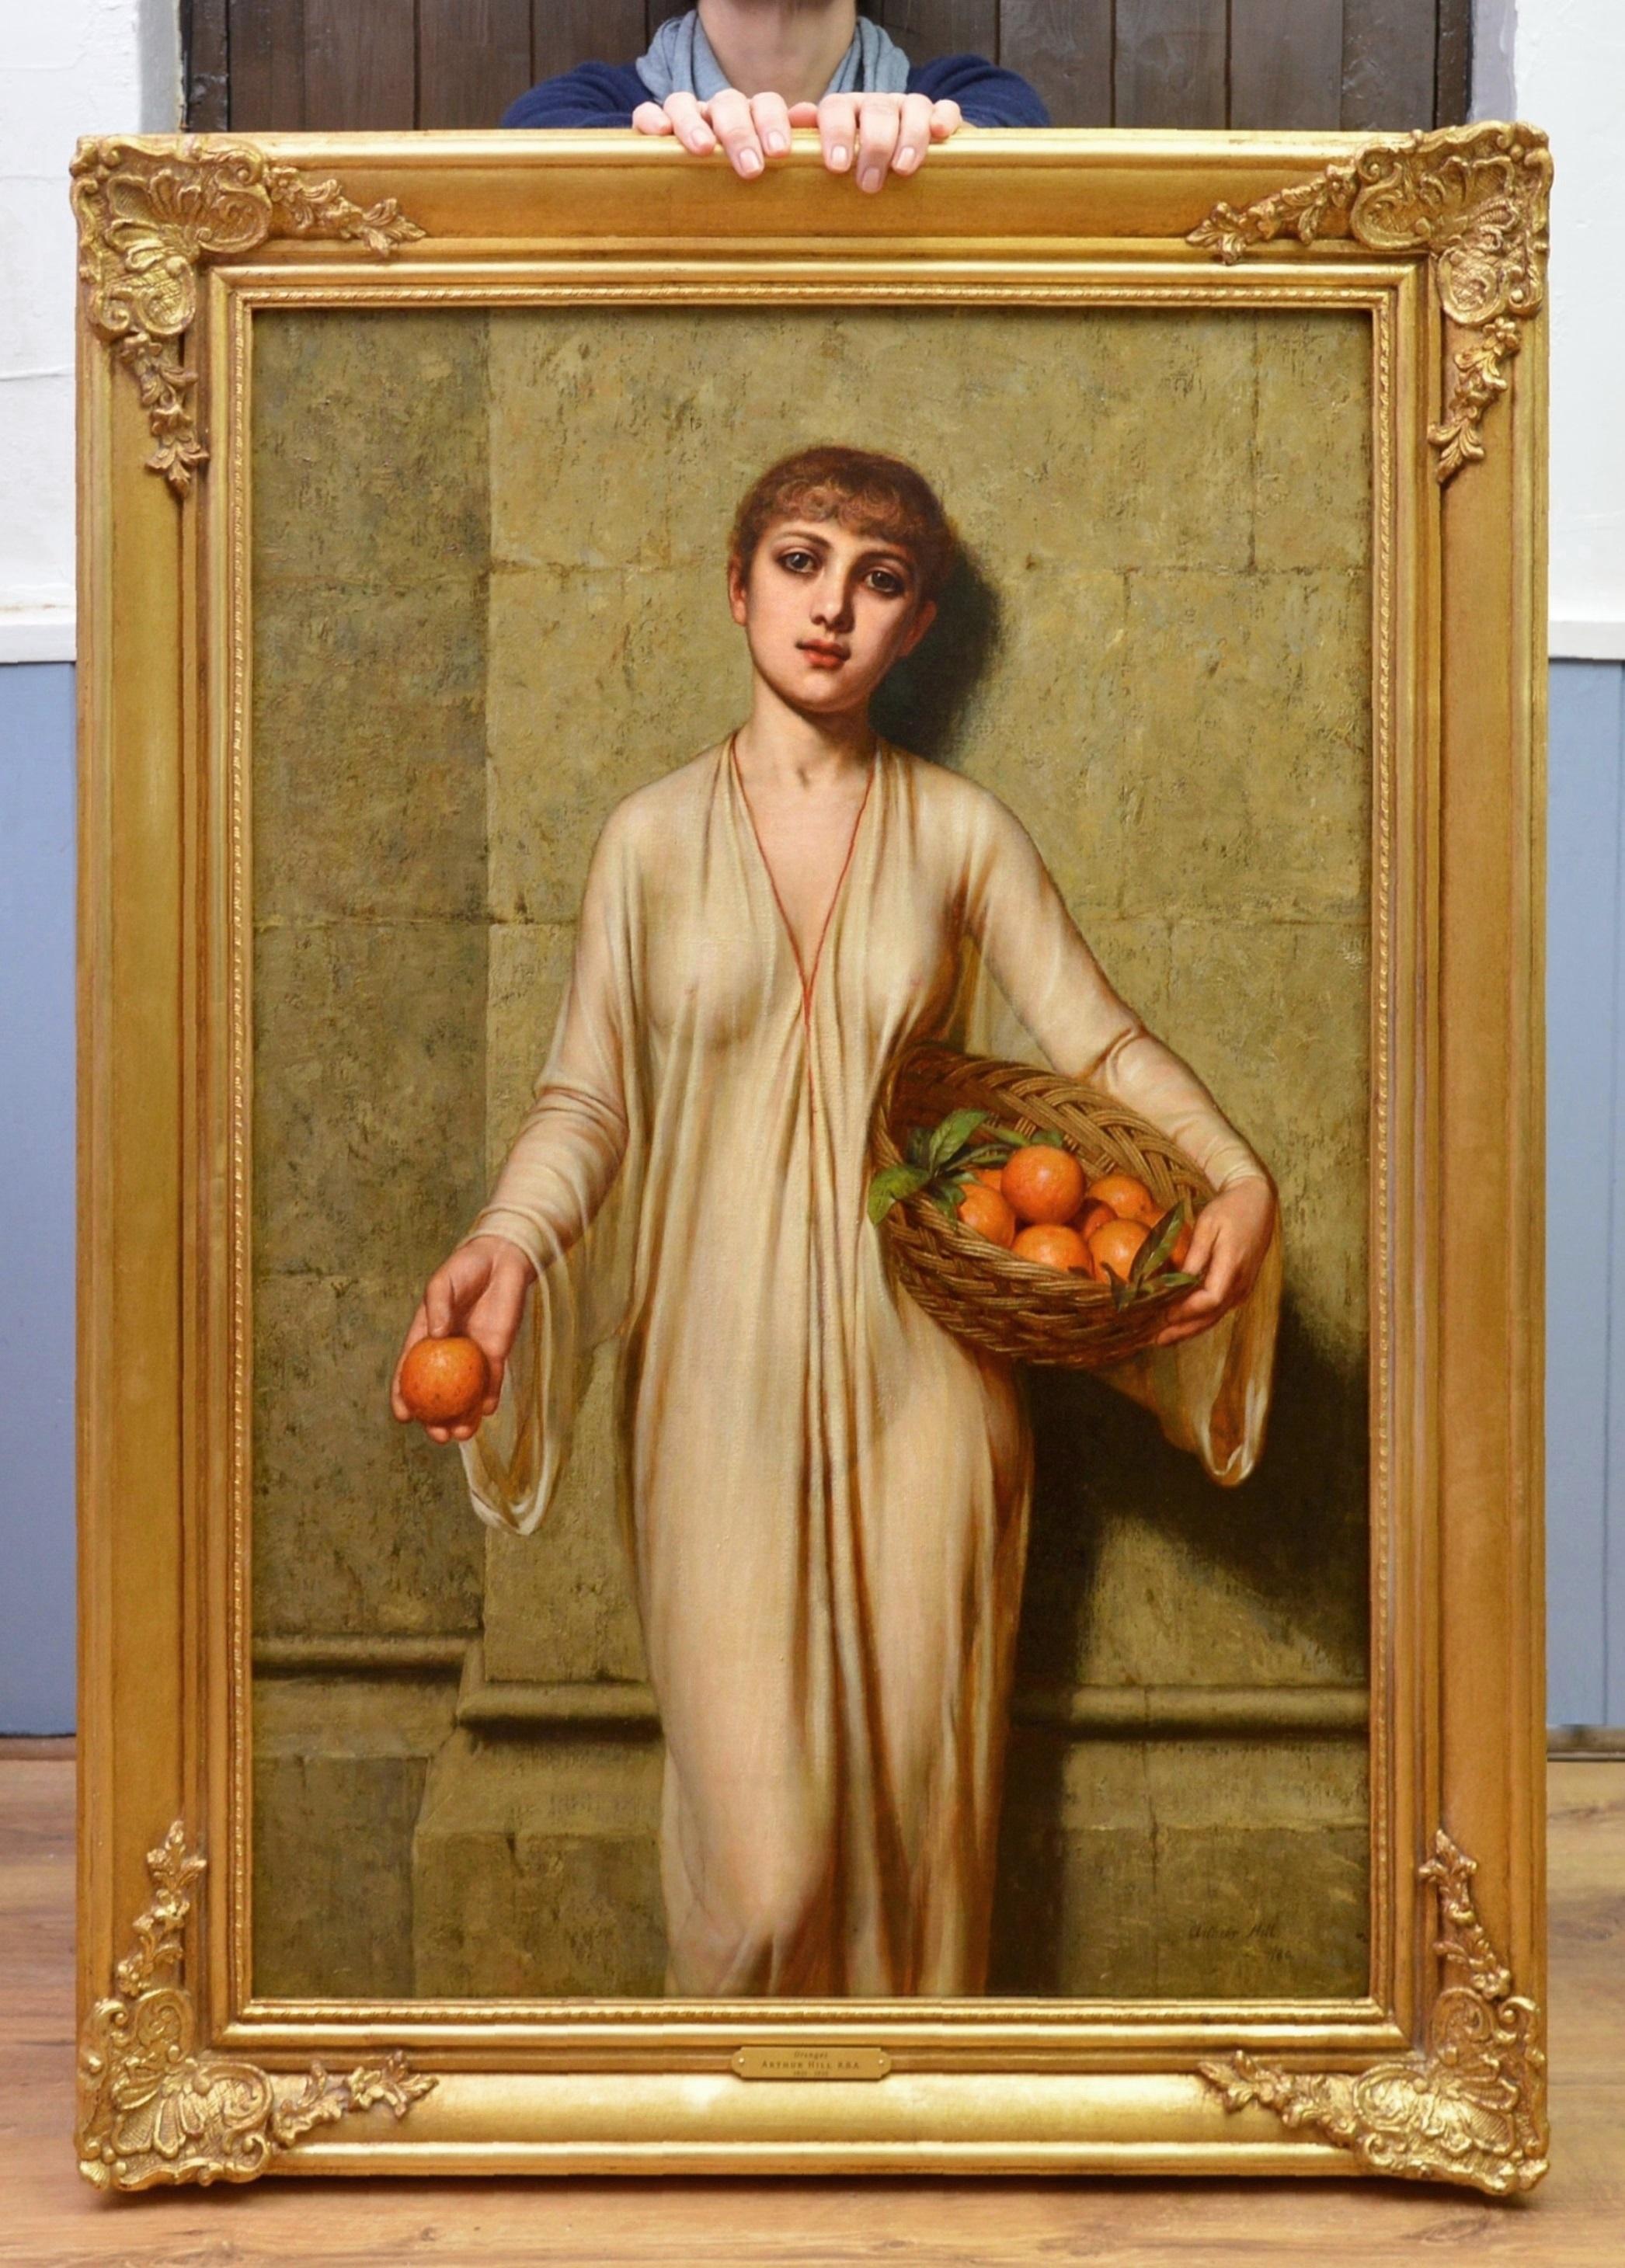 Oranges - 19th Century Neoclassical Portrait Oil Painting of Young Roman Girl (Braun), Figurative Painting, von Arthur Hill